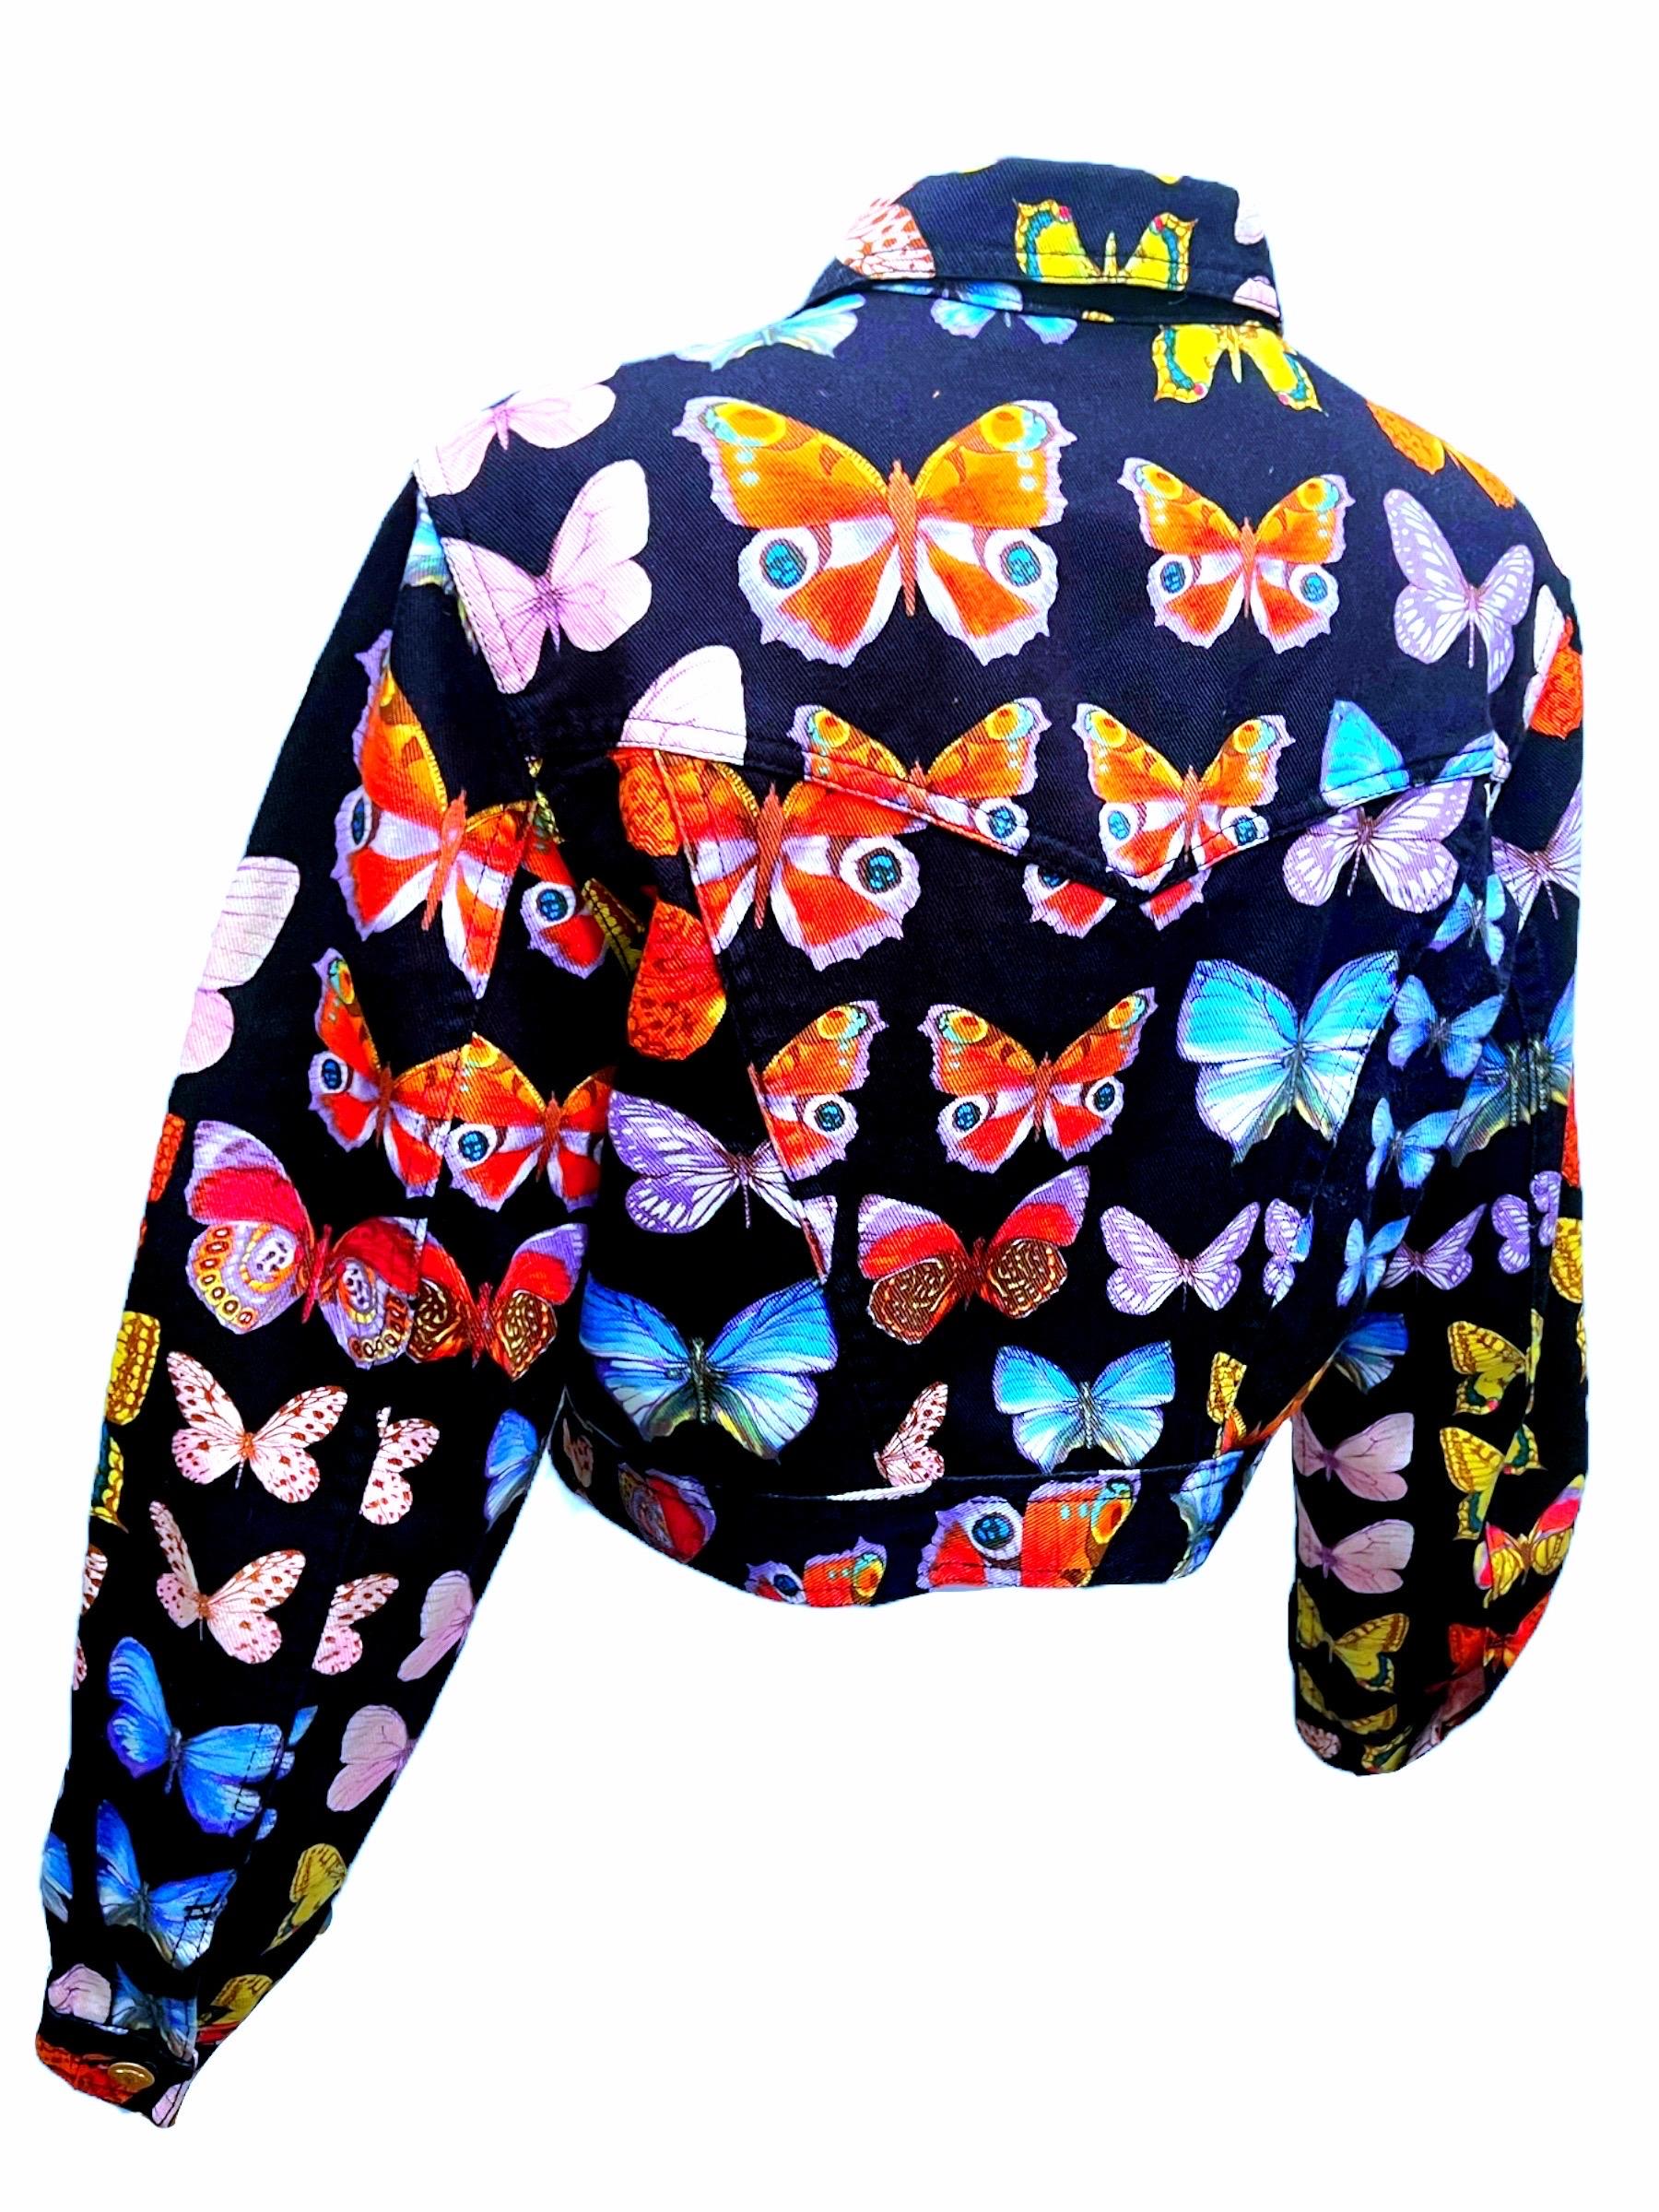 S/S 1995 Gianni Versace Butterfly Printed Jacket For Sale 3